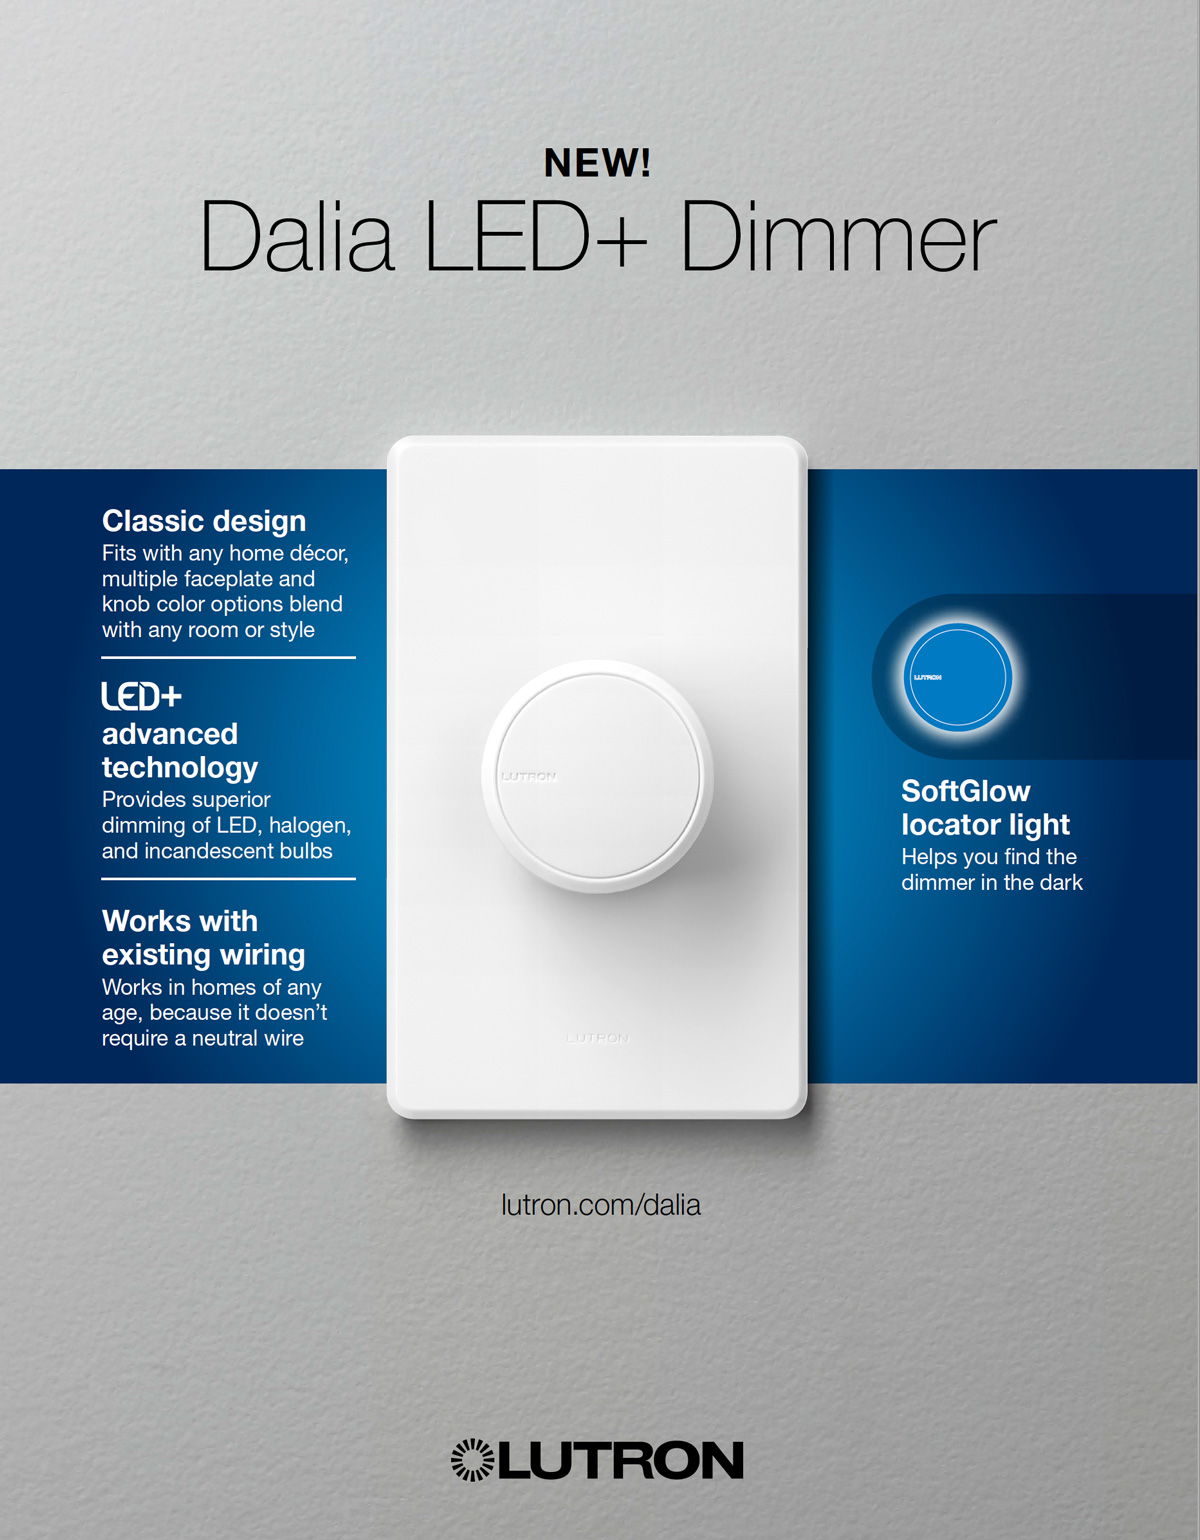 NEW Dalia dimmer with LED+® Advanced Technology for superior dimming of LED, incandescent, and halogen bulbs.